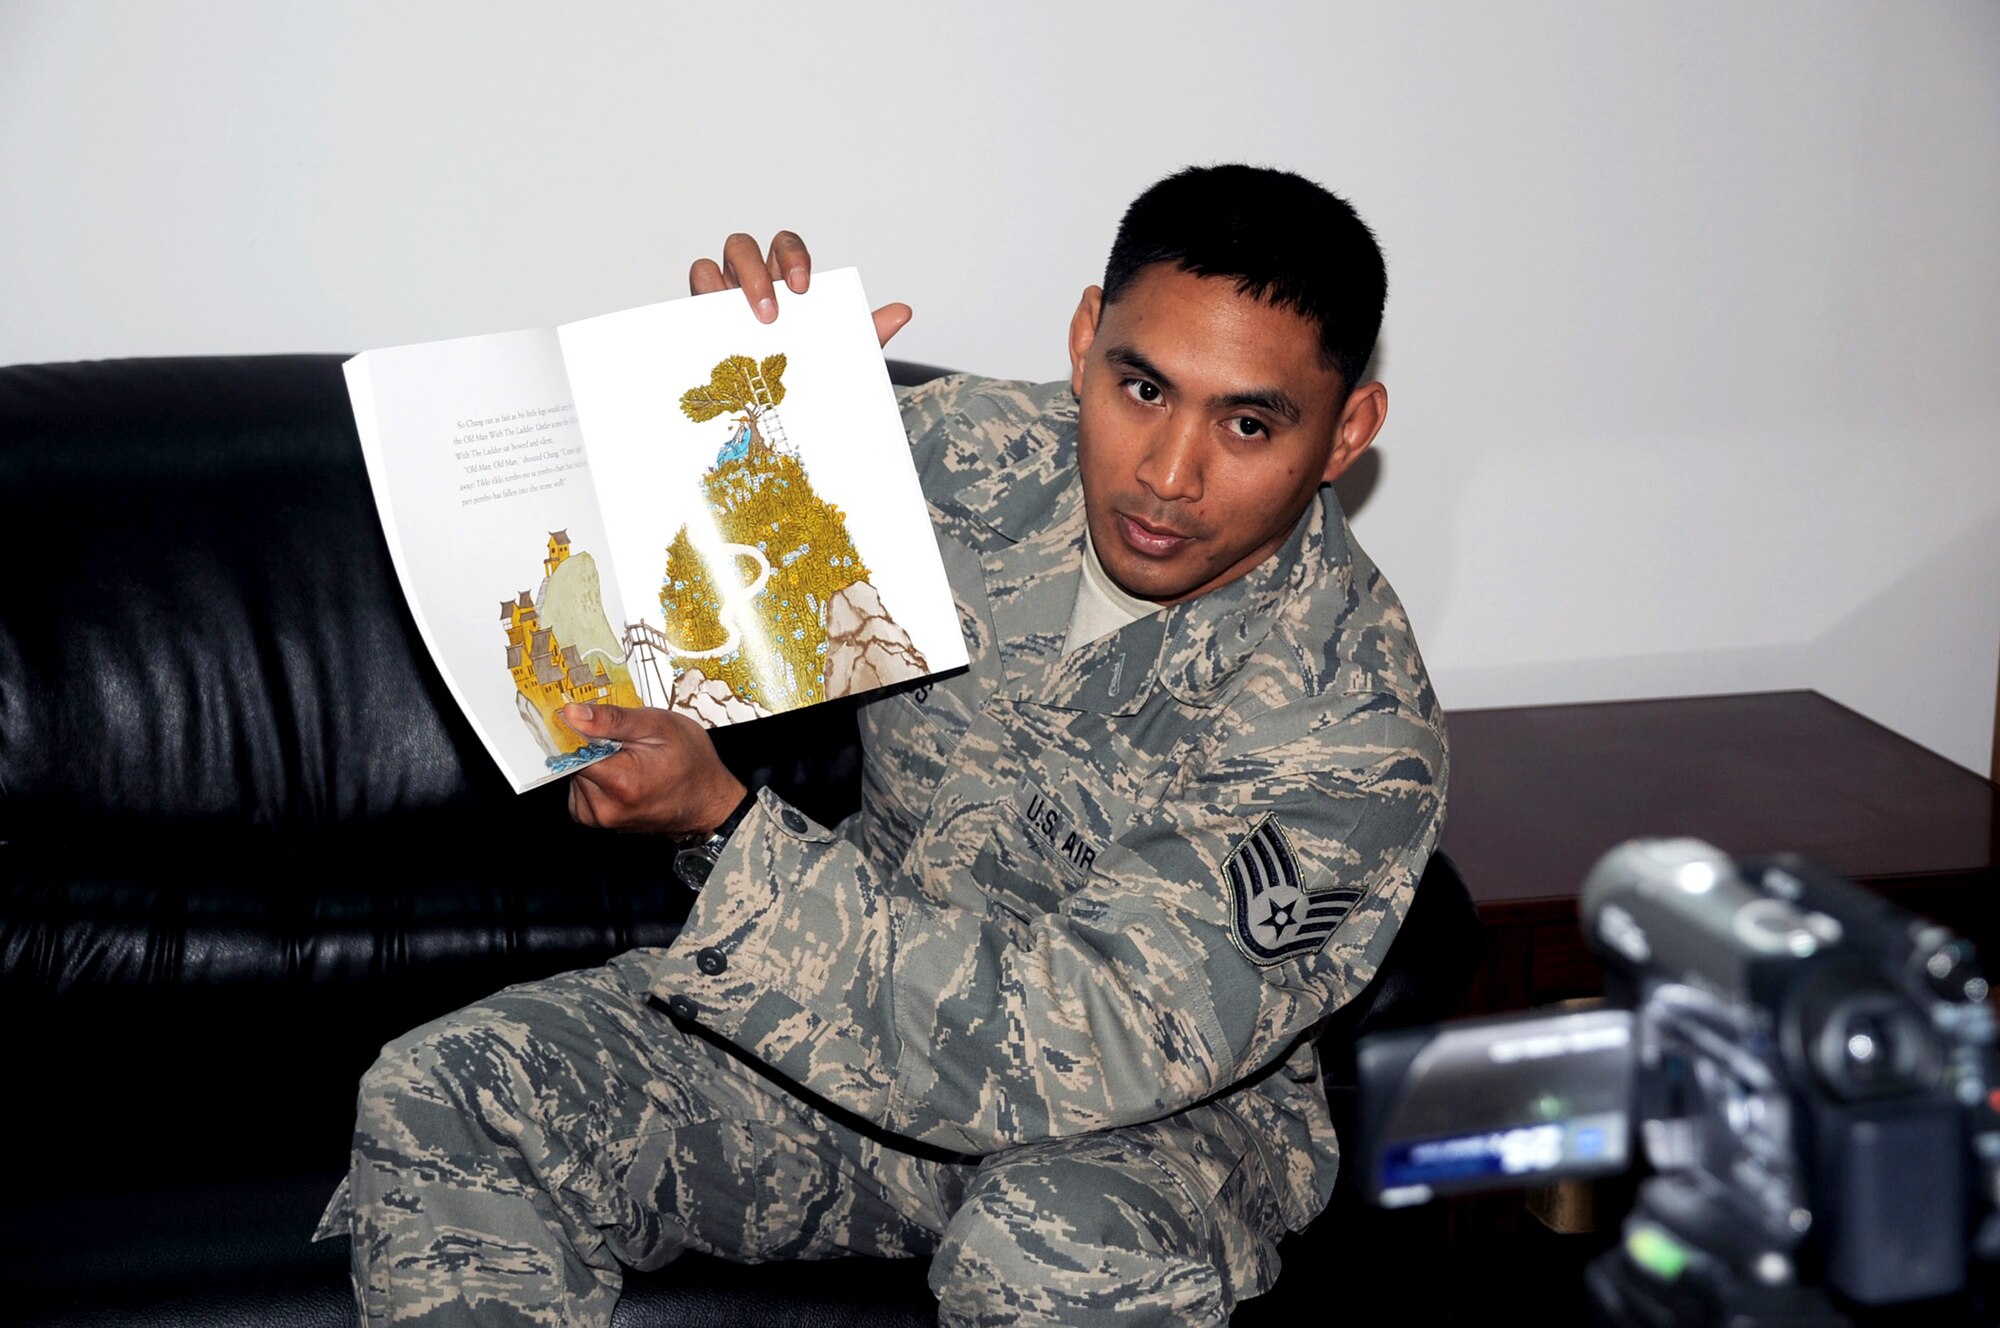 Staff Sgt. Gavin Ramos is video-recorded April 8, 2010, while reading a book for his children at a non-disclosed base in Southwest Asia. Sergeant Ramos was the first Airman at the 380th Air Expeditionary Wing to participate in the USO's United Through Reading program. The program allows a deployed servicemember to read a book while being recorded, and the book and a DVD are sent home to a child to view and follow along. Sergeant Ramos is a services journeyman with the 380th Expeditionary Force Support Squadron. He is deployed from the 154th Force Support Squadron at Joint Base Pearl Harbor-Hickam, Hawaii. (U.S. Air Force Photo/Master Sgt. Scott T. Sturkol)